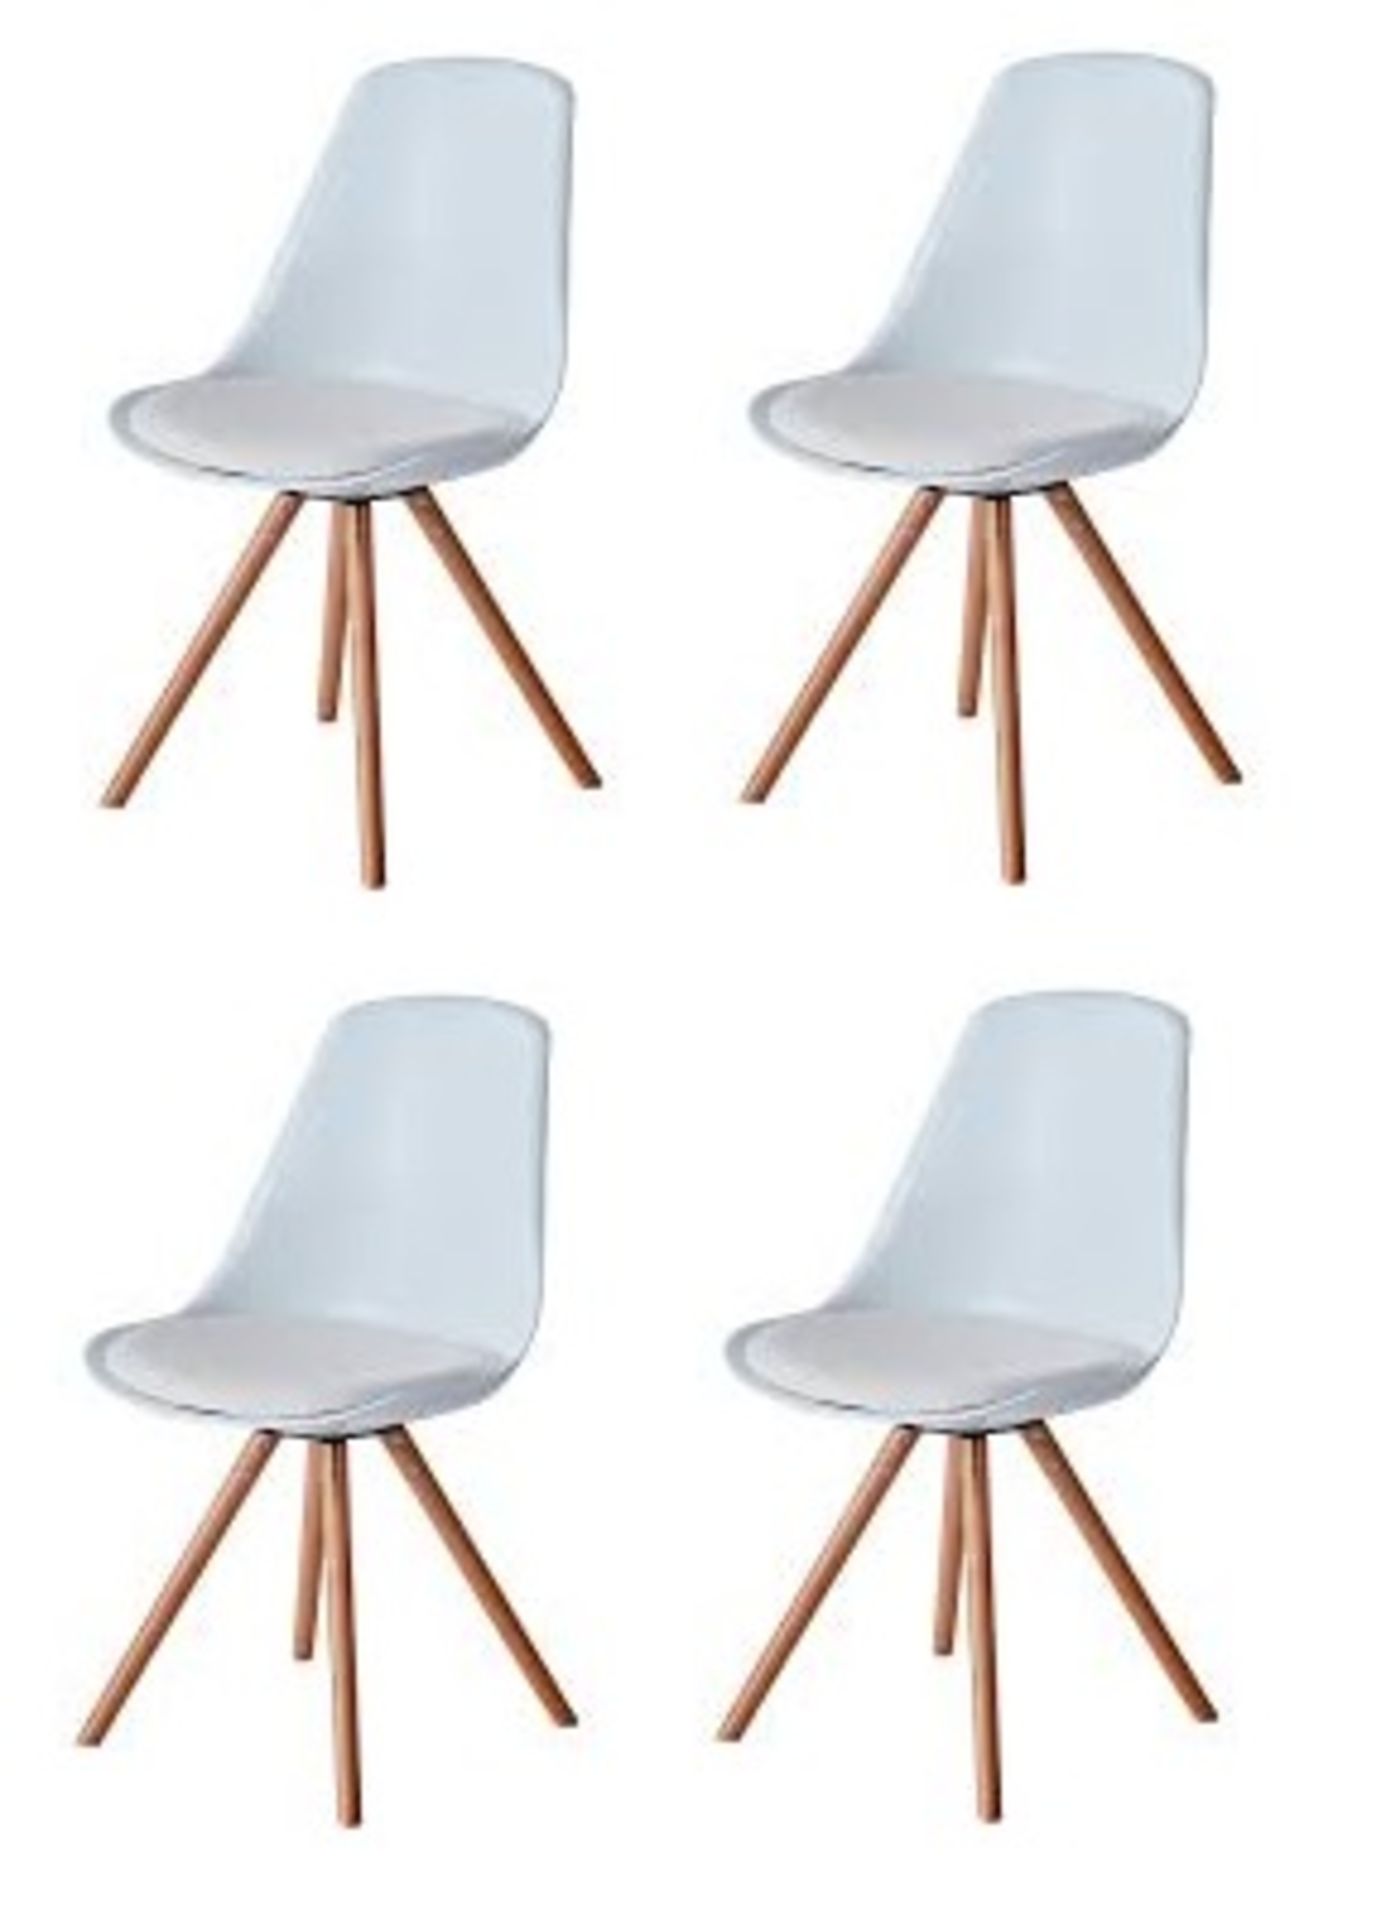 Set of 4 x Contemporary Scandinavian-style Dining Chairs in White - Deep Seated Mid Century Design